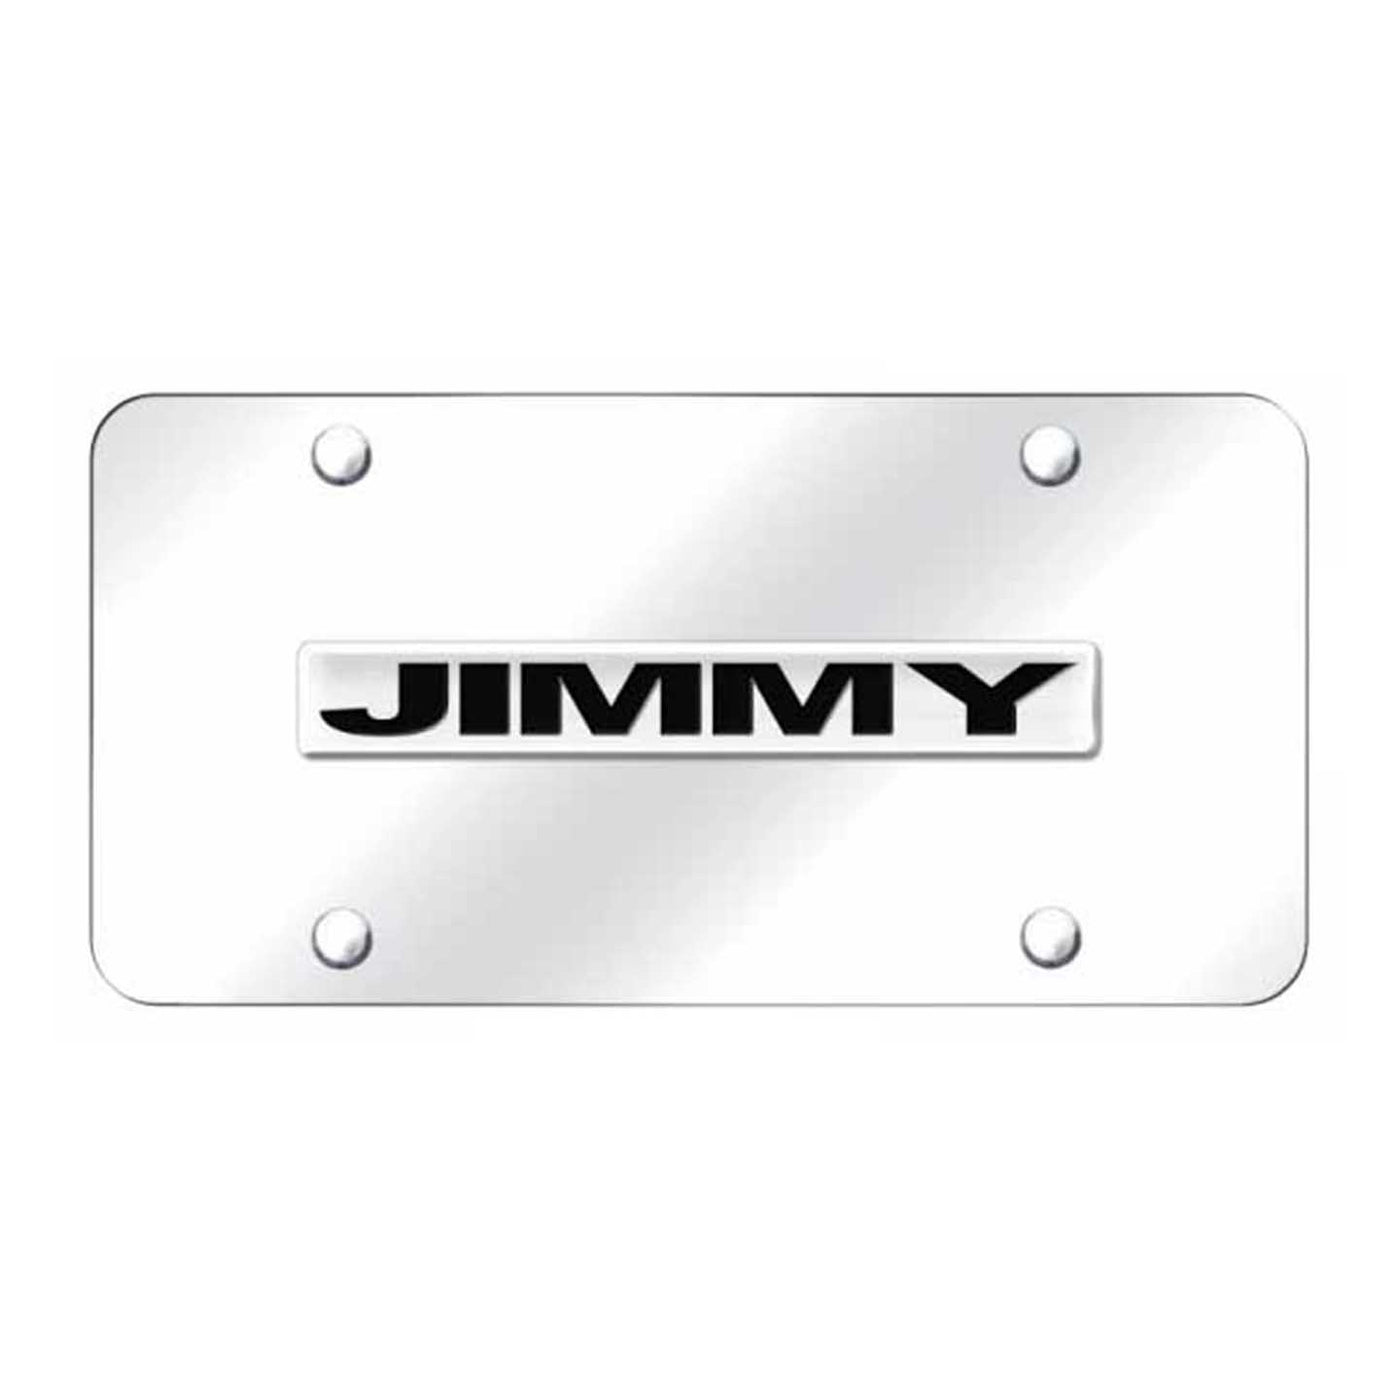 Jimmy Name License Plate - Chrome on Mirrored